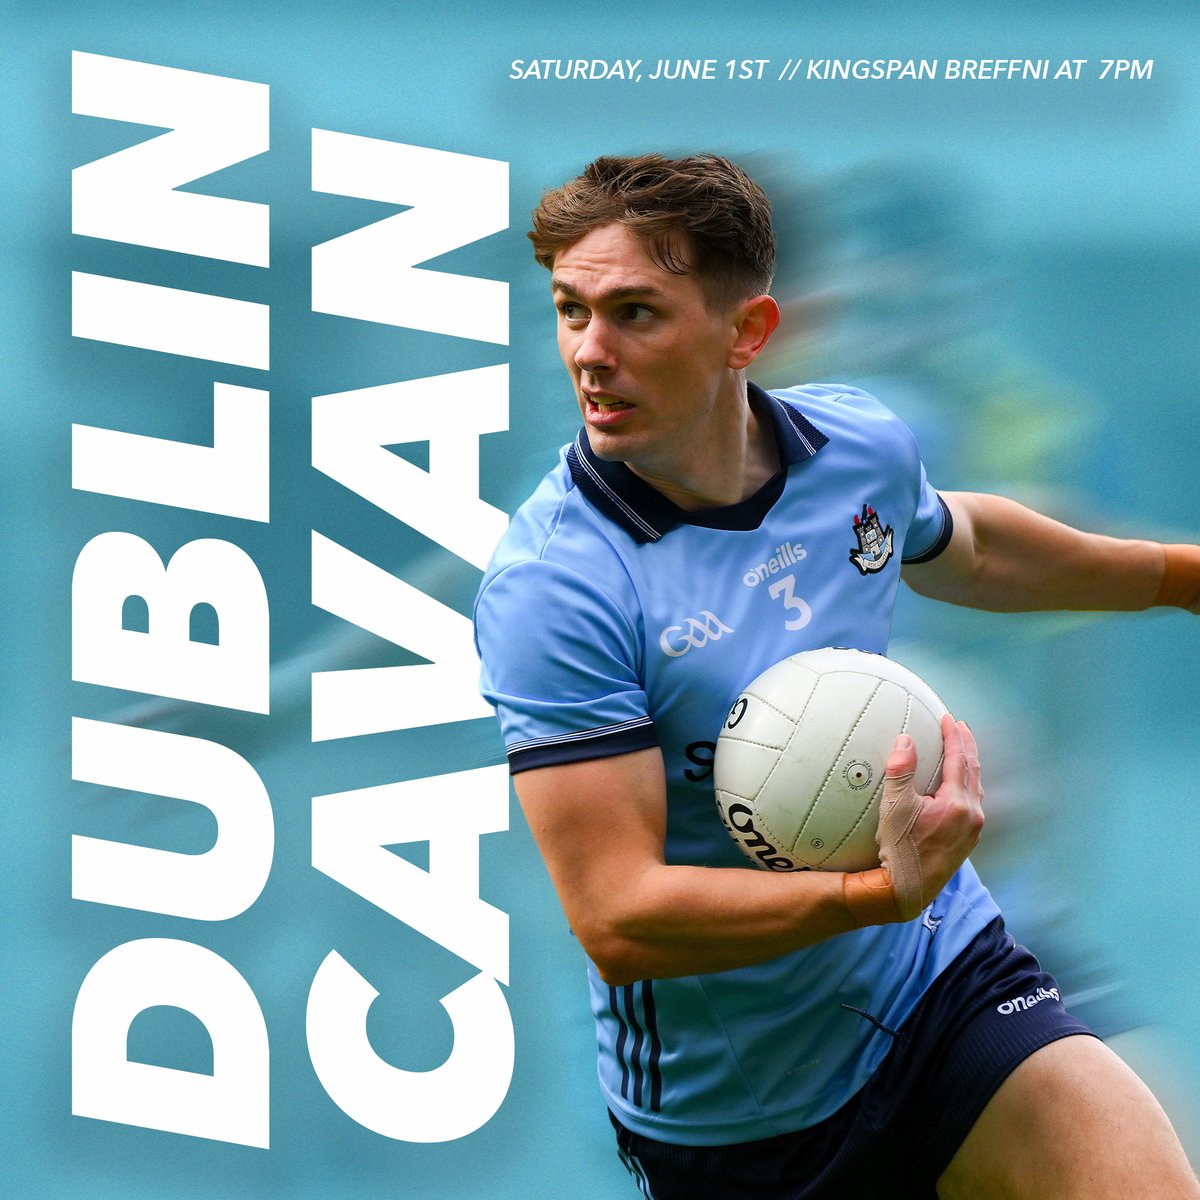 Our Senior Footballers make the trip to Kingspan Breffni on Saturday for game 2️⃣ of their All Ireland Campaign 👕💪 🎟 Ticket info ➡️ bit.ly/3WXVo1o #UpTheDubs